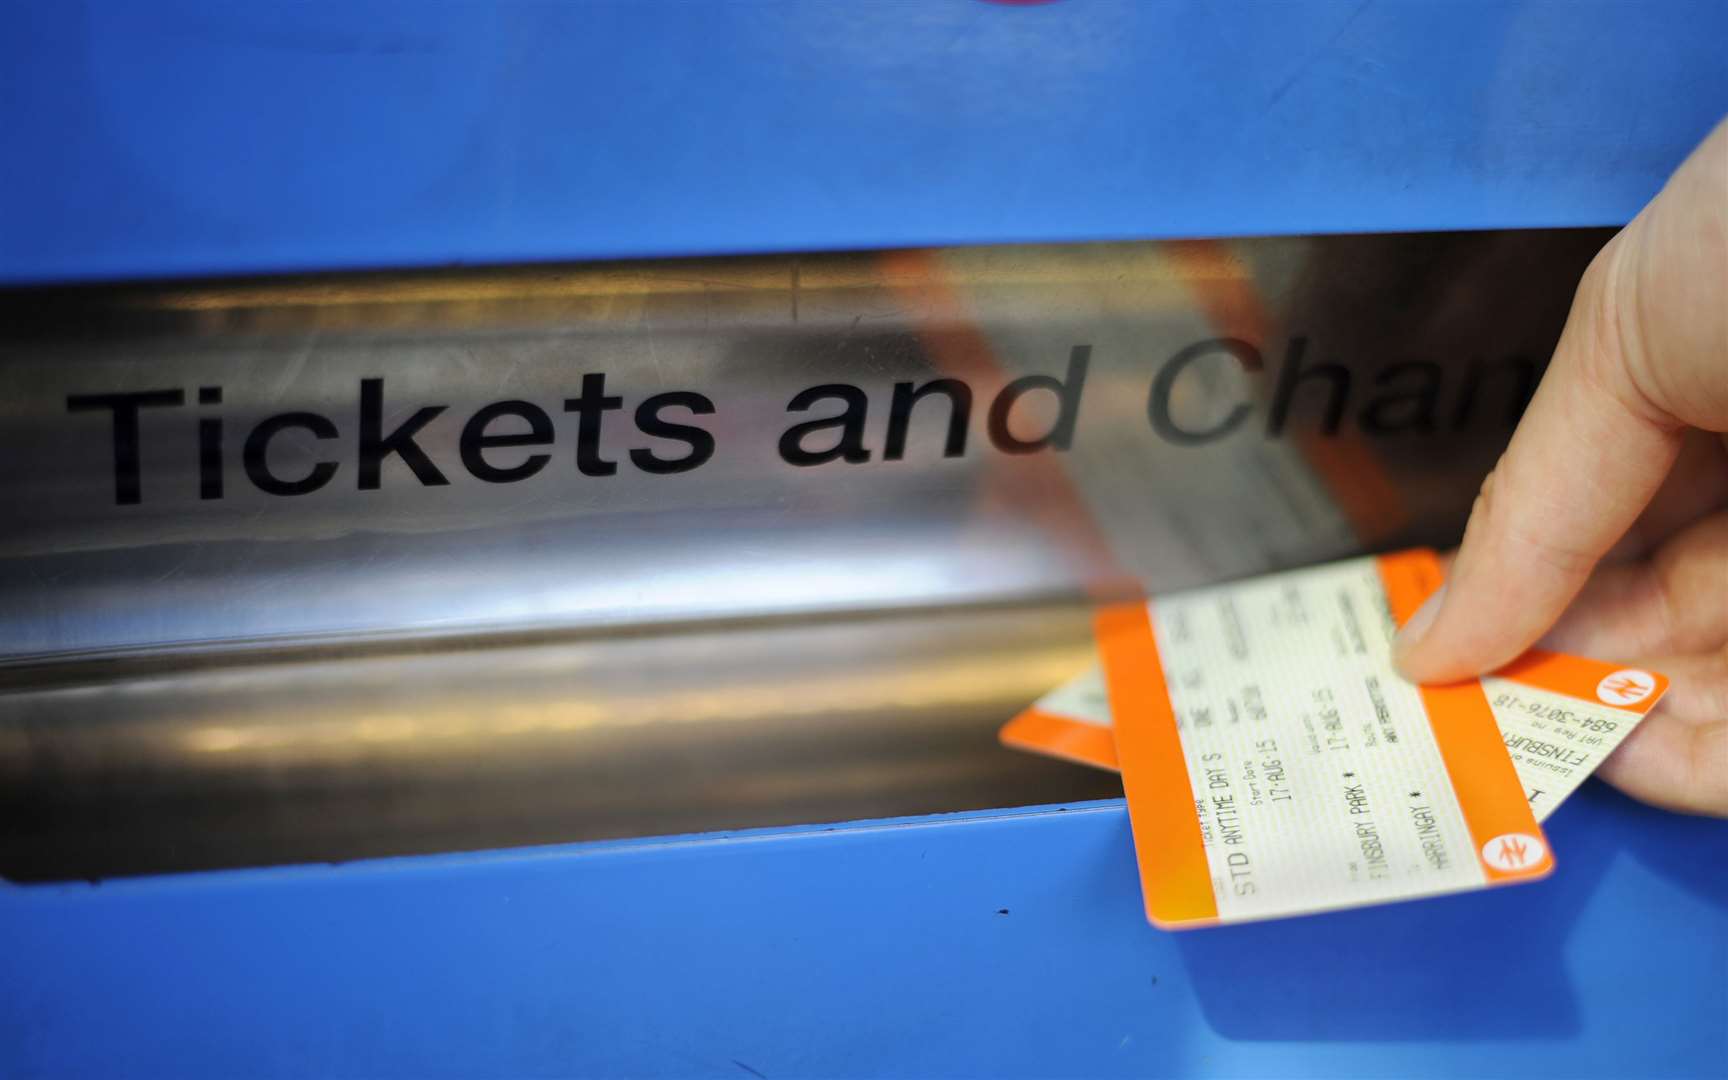 Train fares are set to rise across England and Scotland this year (Lauren Hurley/PA)